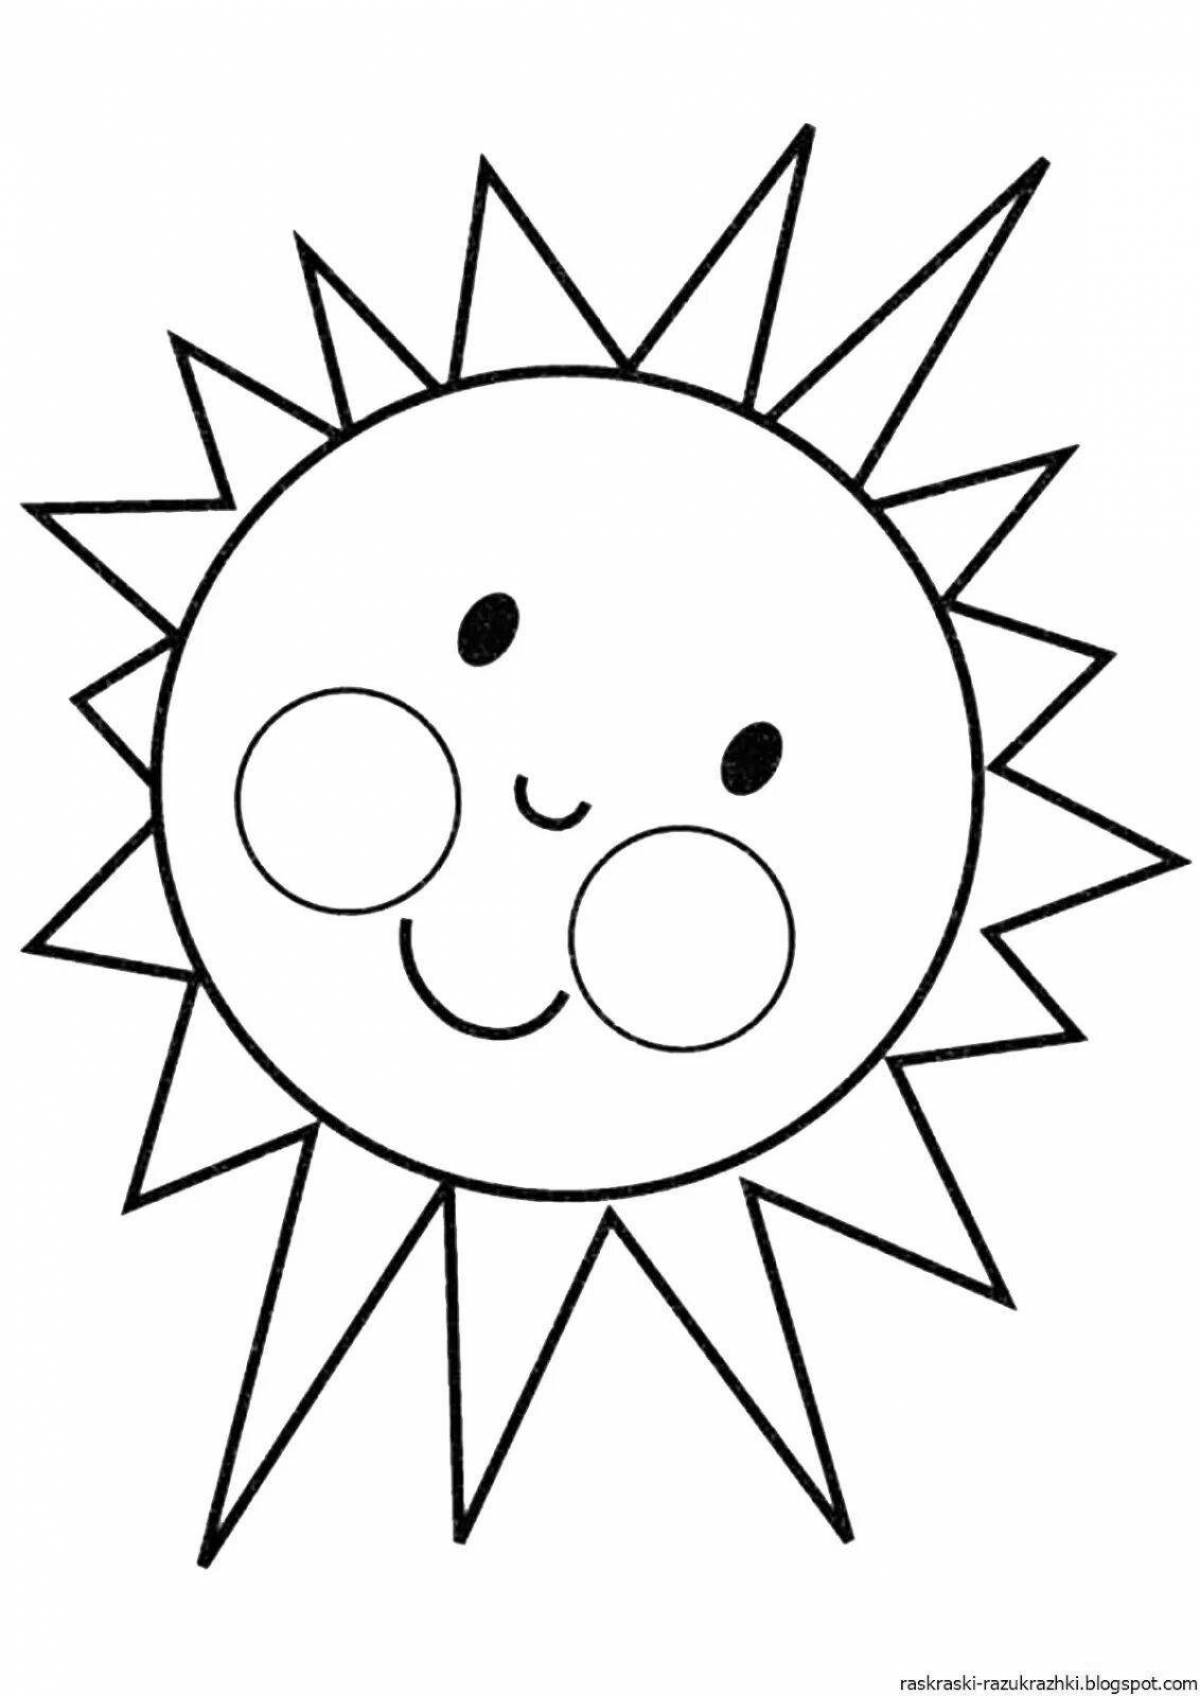 Radiant coloring page солнечная фигура